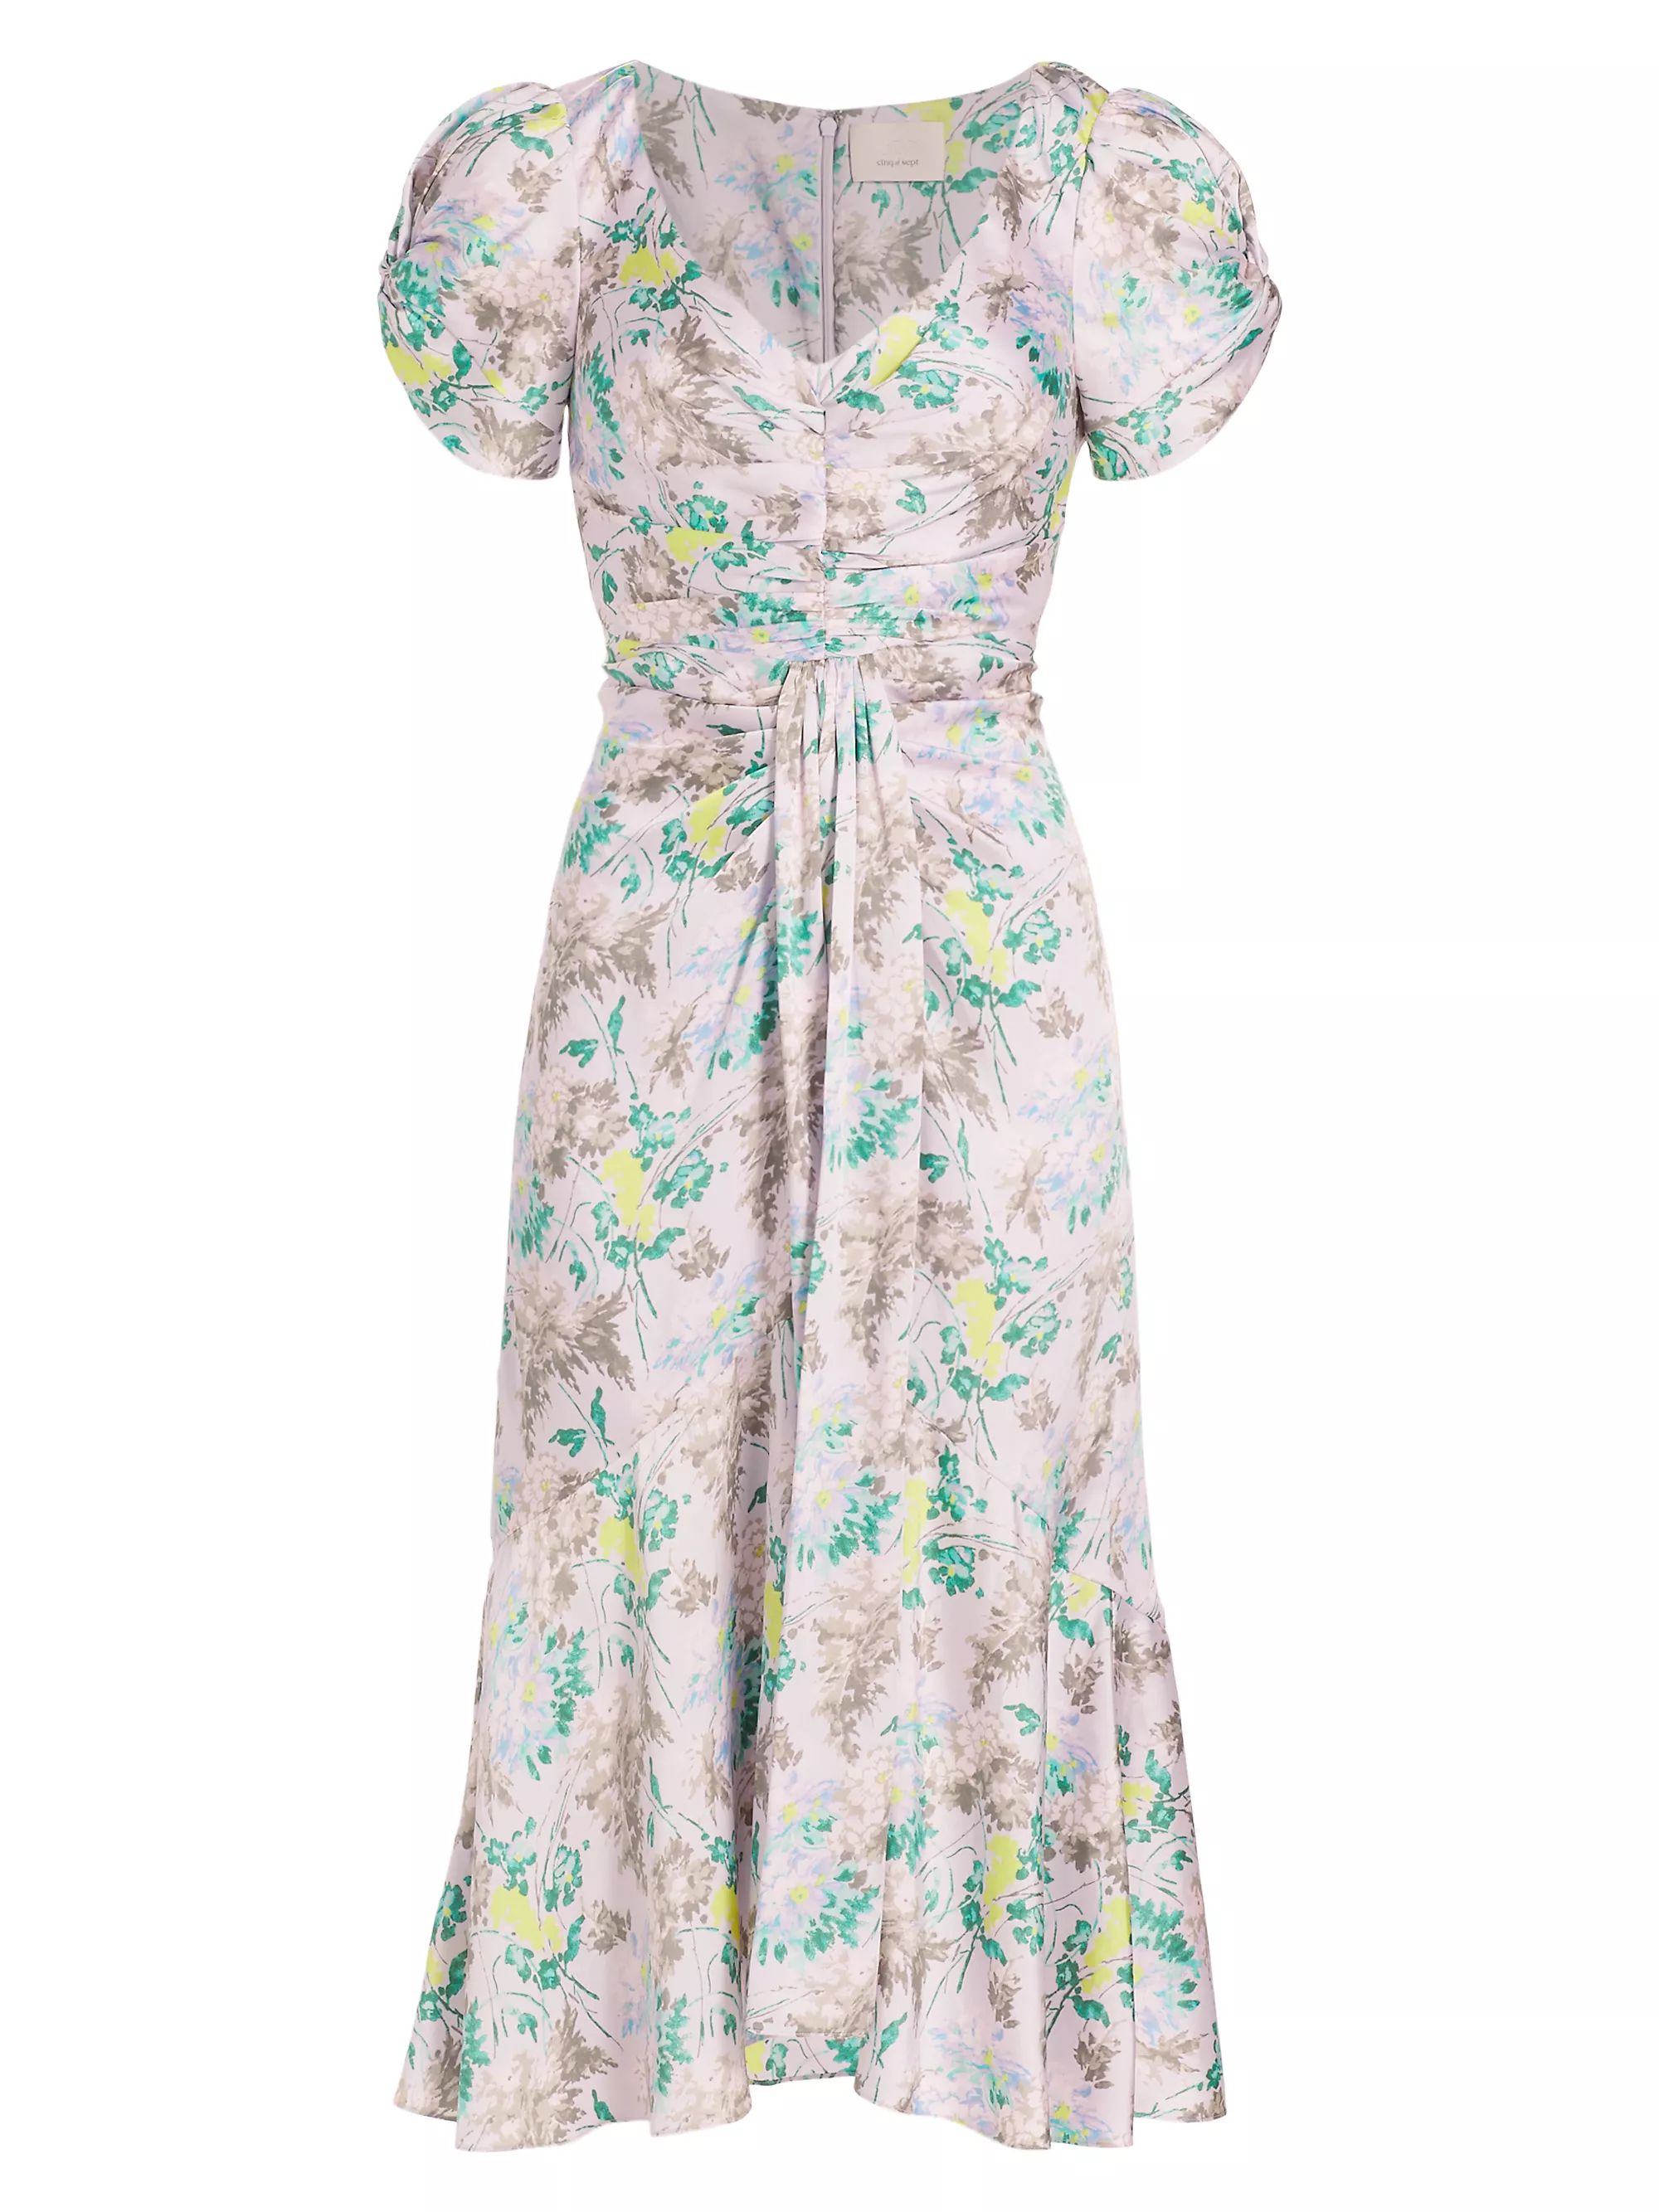 Pastel MultiAll MidiCinq à SeptWalker Floral Ruched Midi-Dress$395
            
          20% Of... | Saks Fifth Avenue